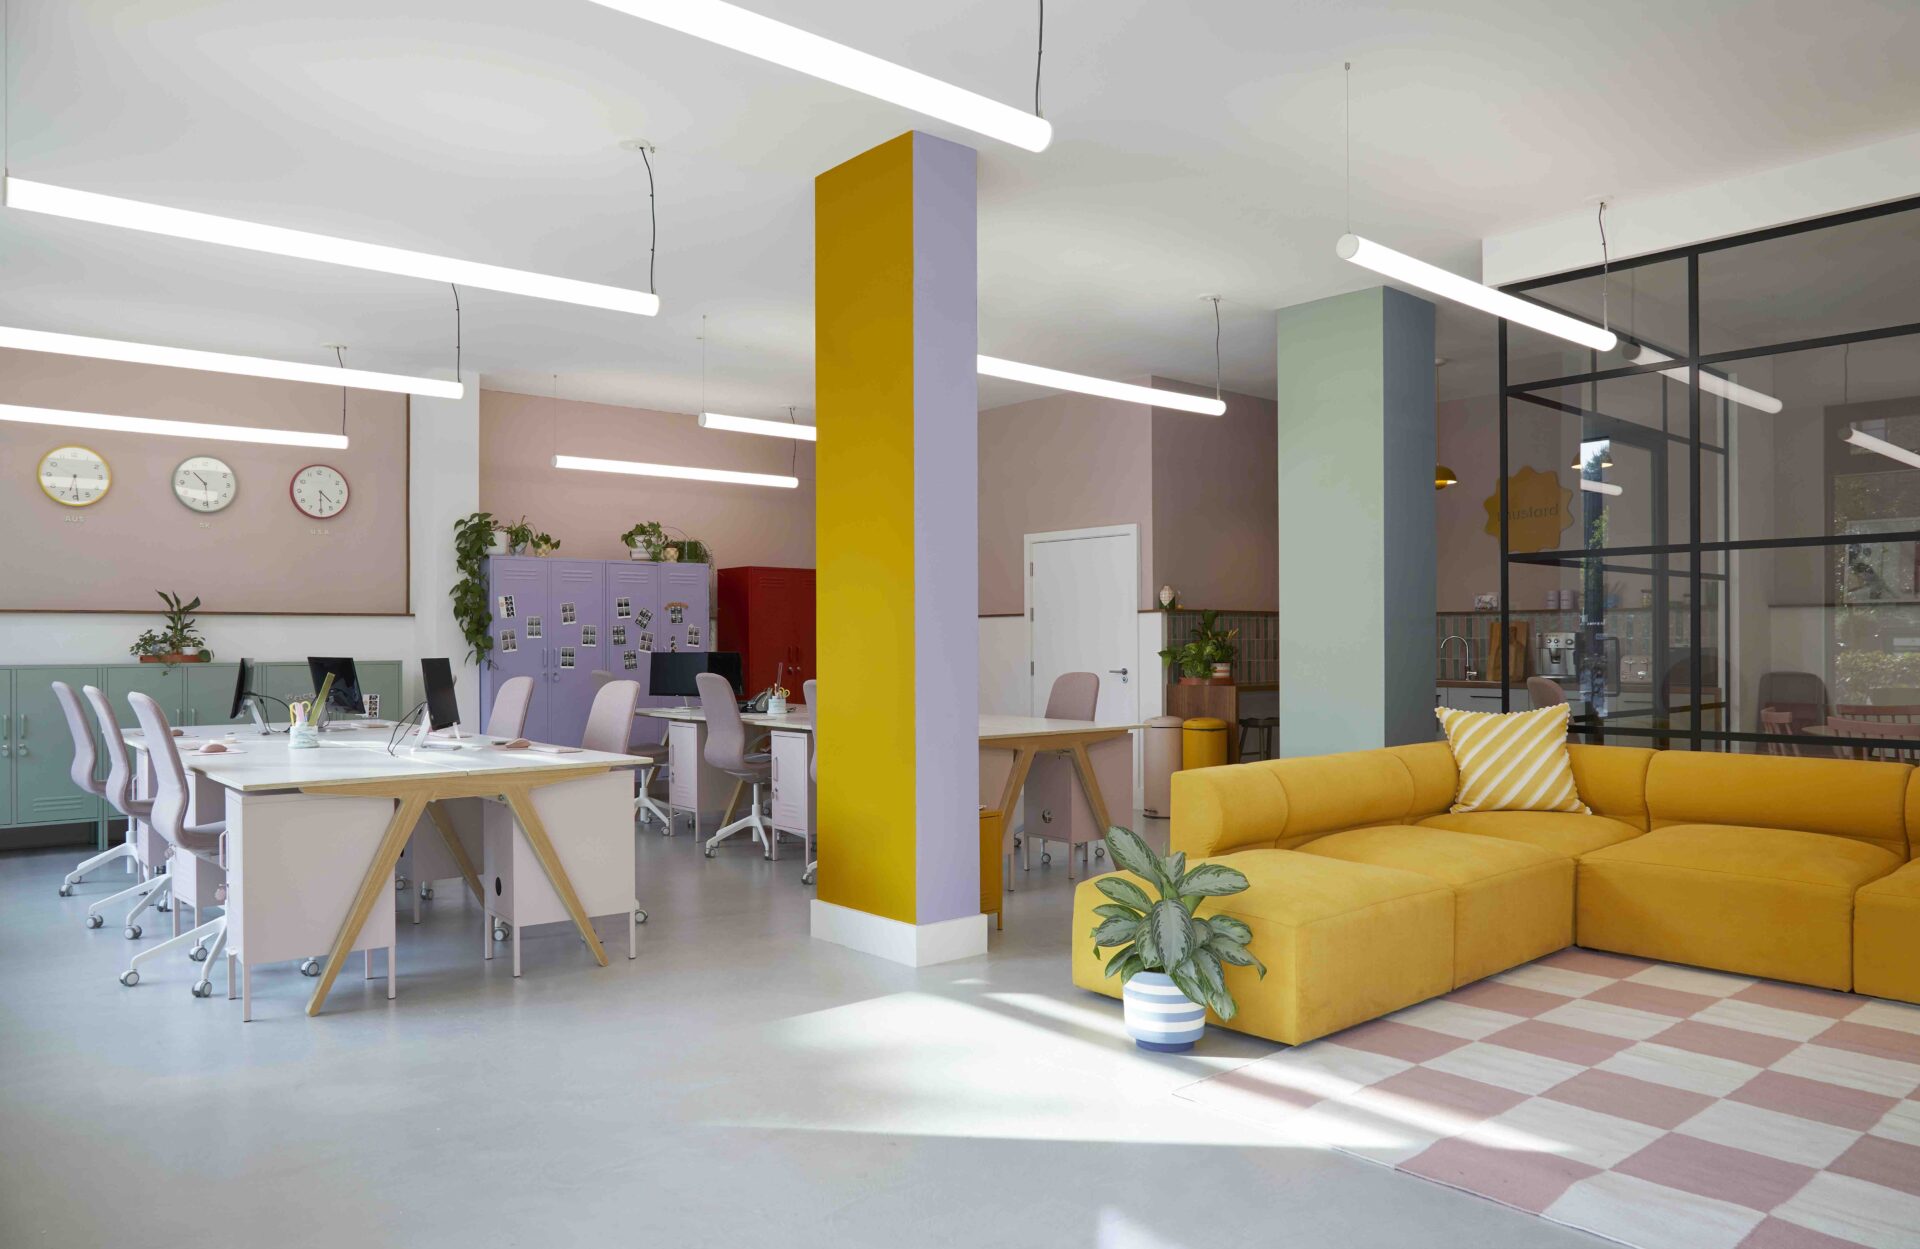 The Mustard Made London HQ Celebrates the Brand's Colourful